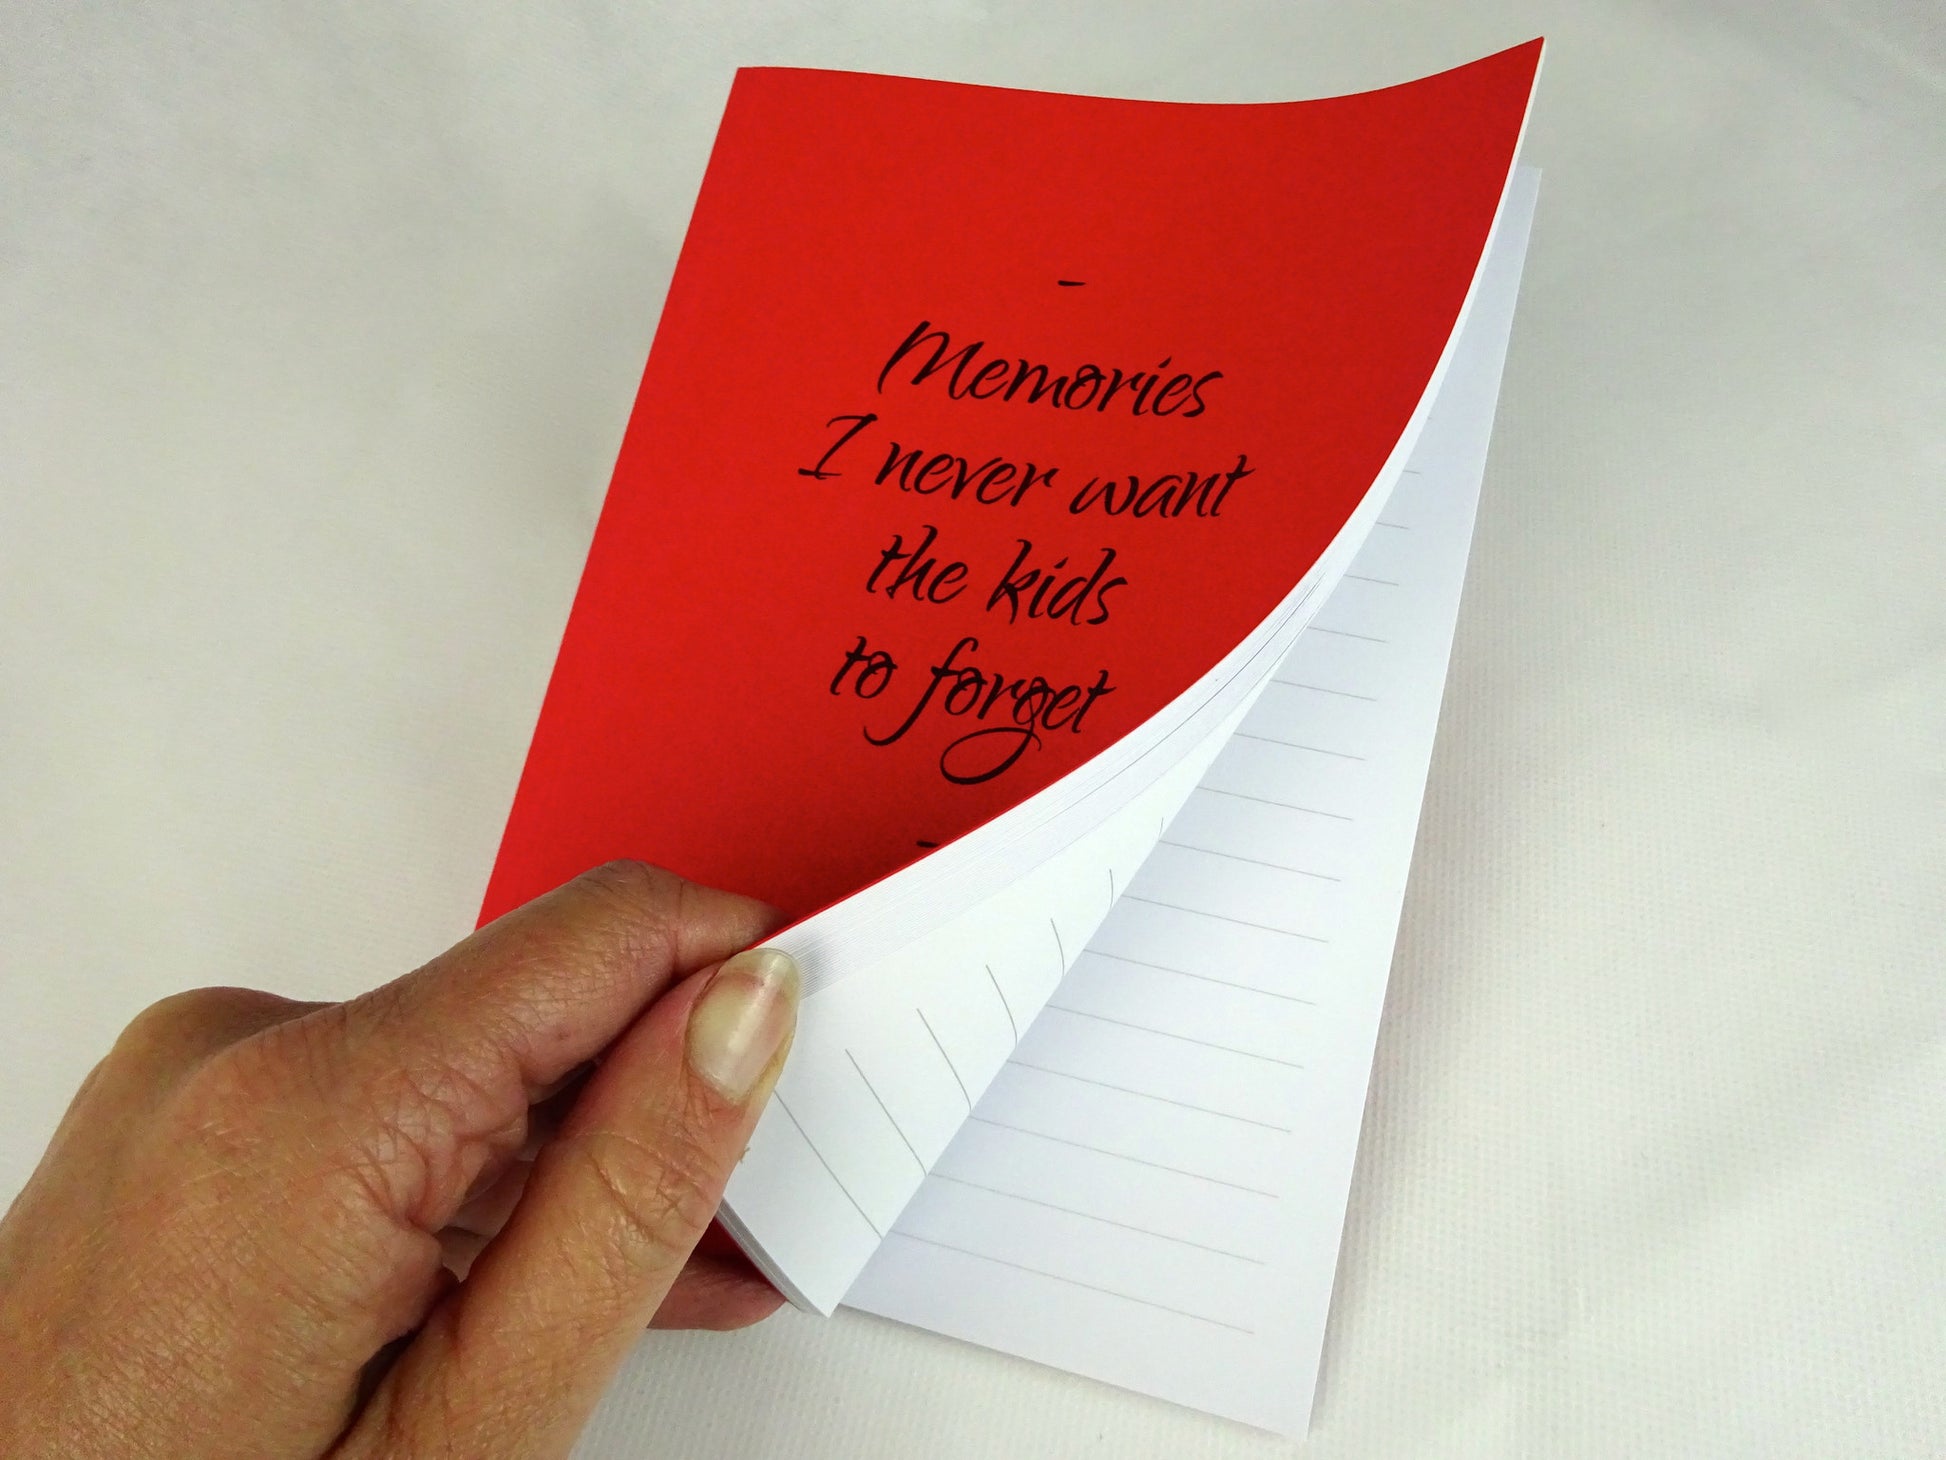 'Memories I never want the kids to forget' notebook